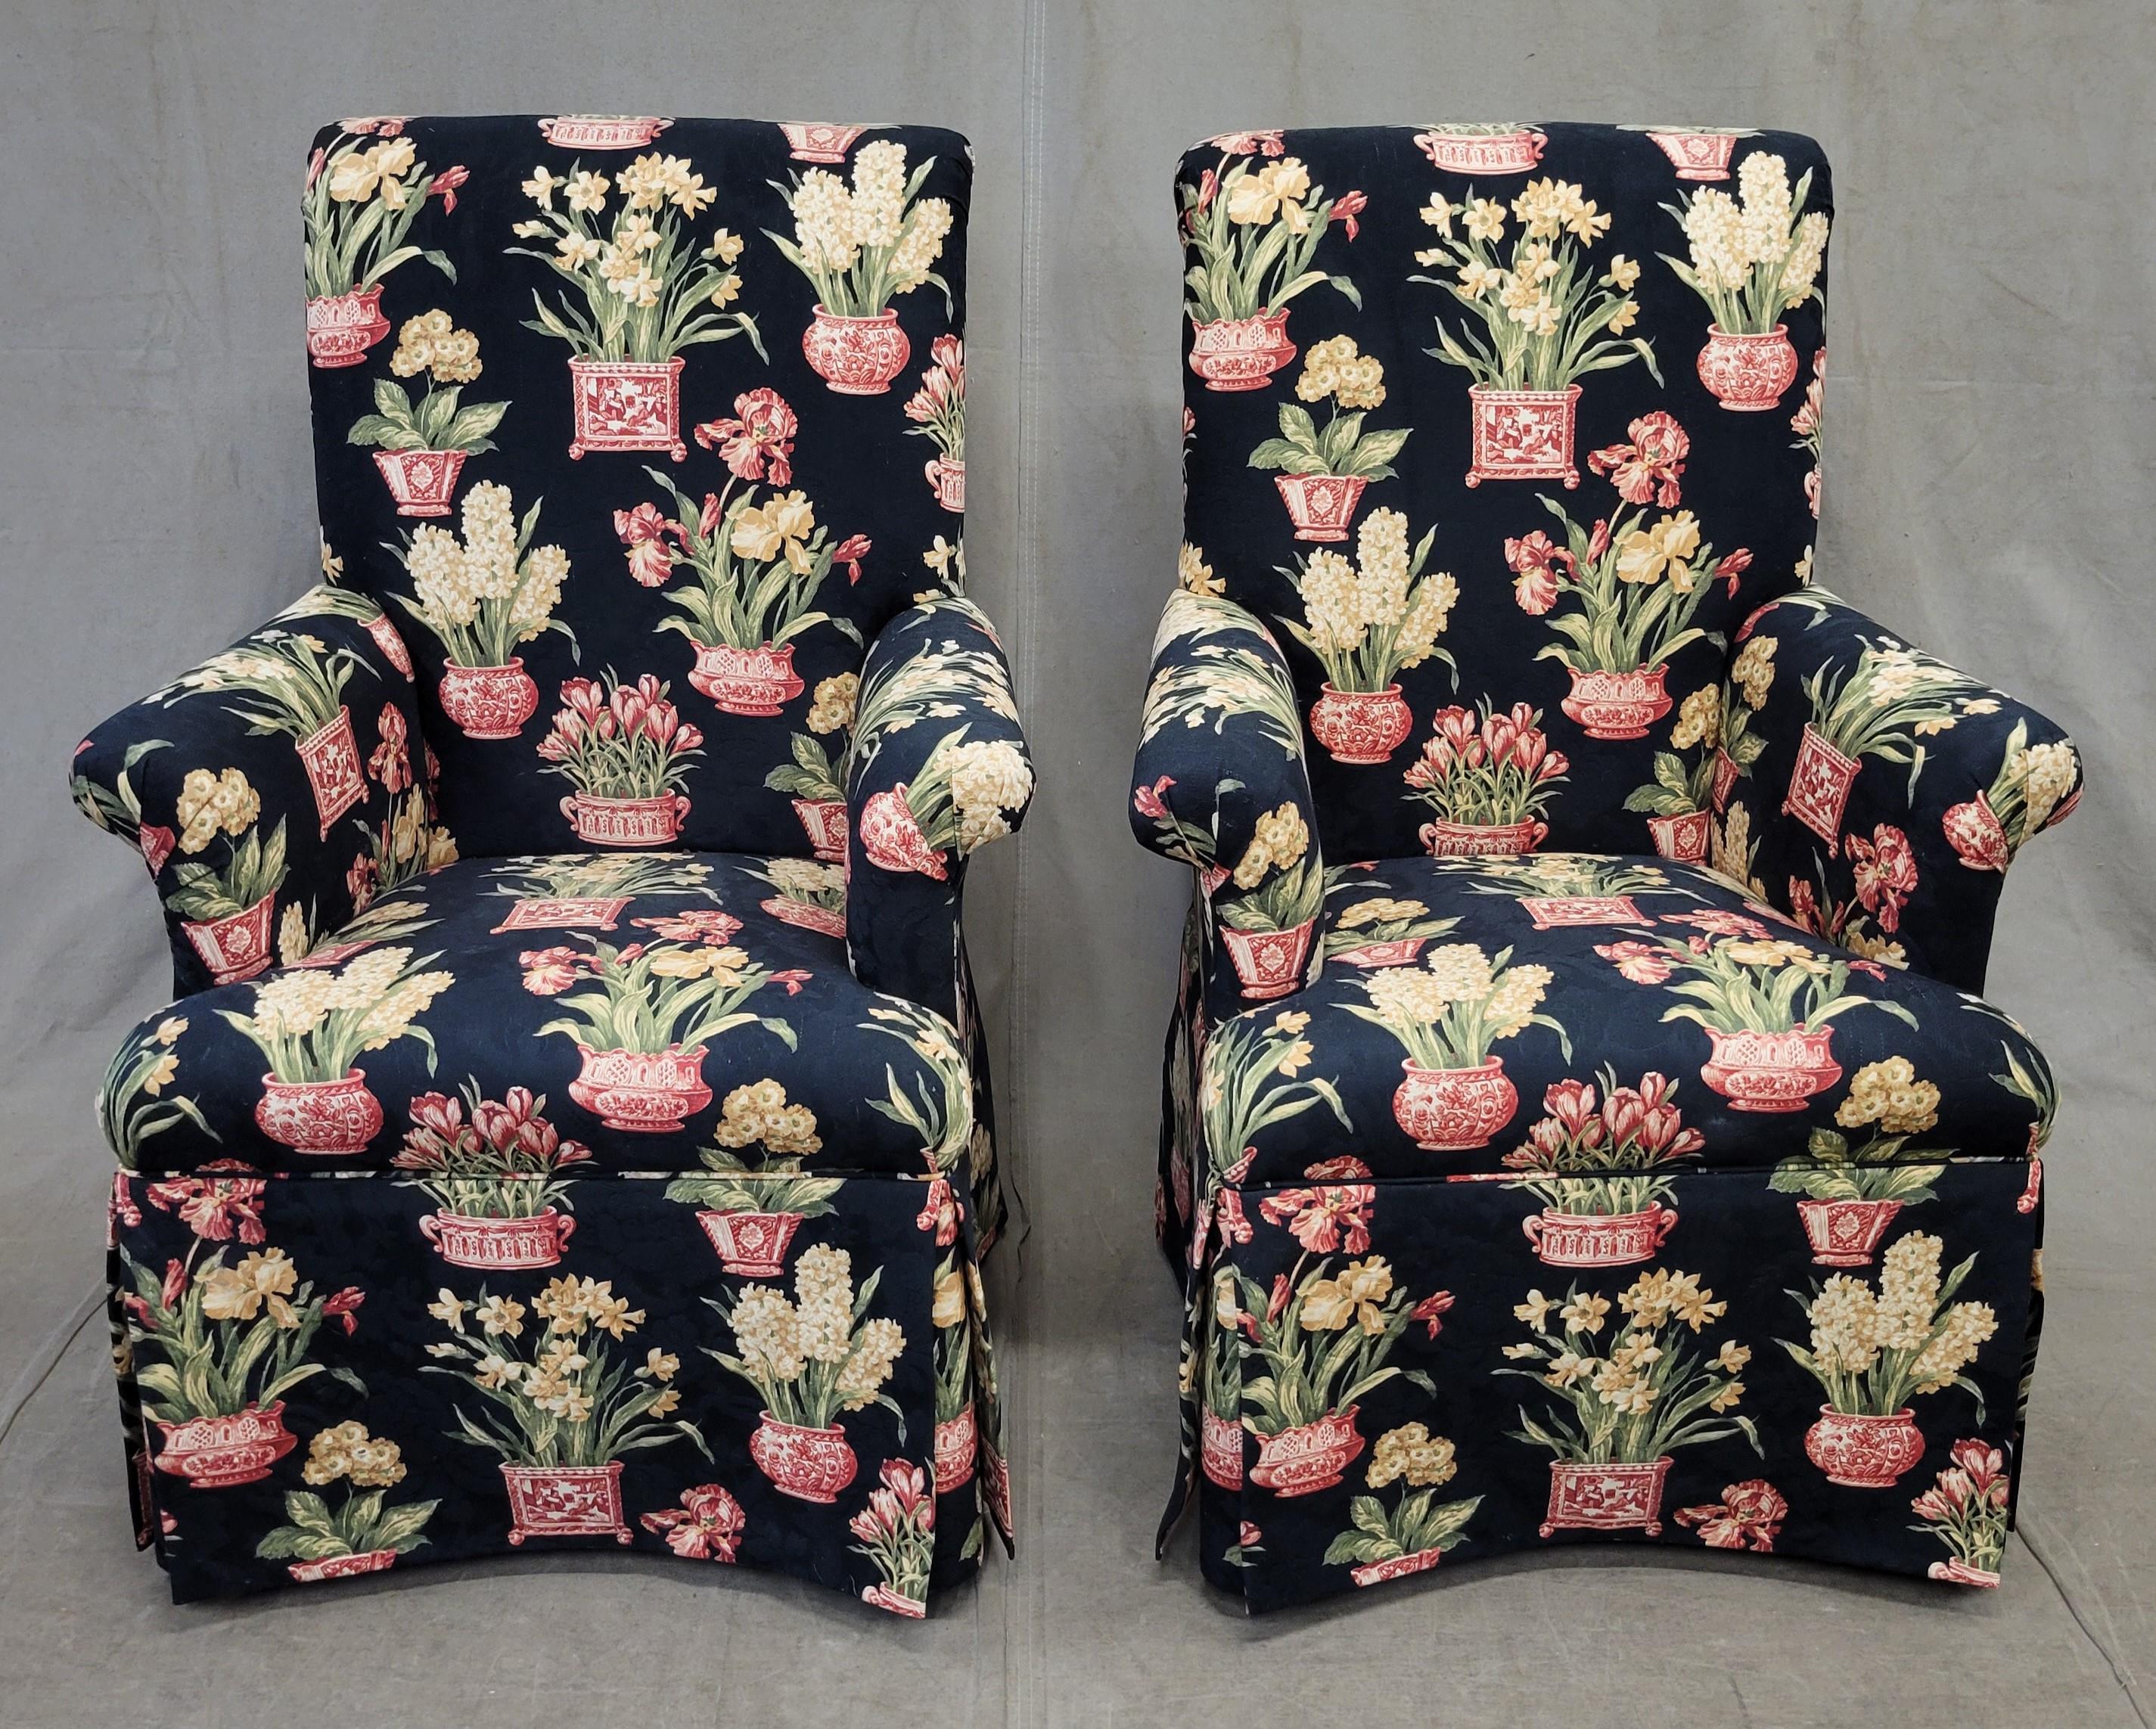 A charming pair of vintage custom Calico Corners petite botanical armchairs. Upholstered in a versatile heavy duty cotton fabric with green and cream iris, daffodils and hyacinths in deep pink Asian style pots contrast beautifully on a black